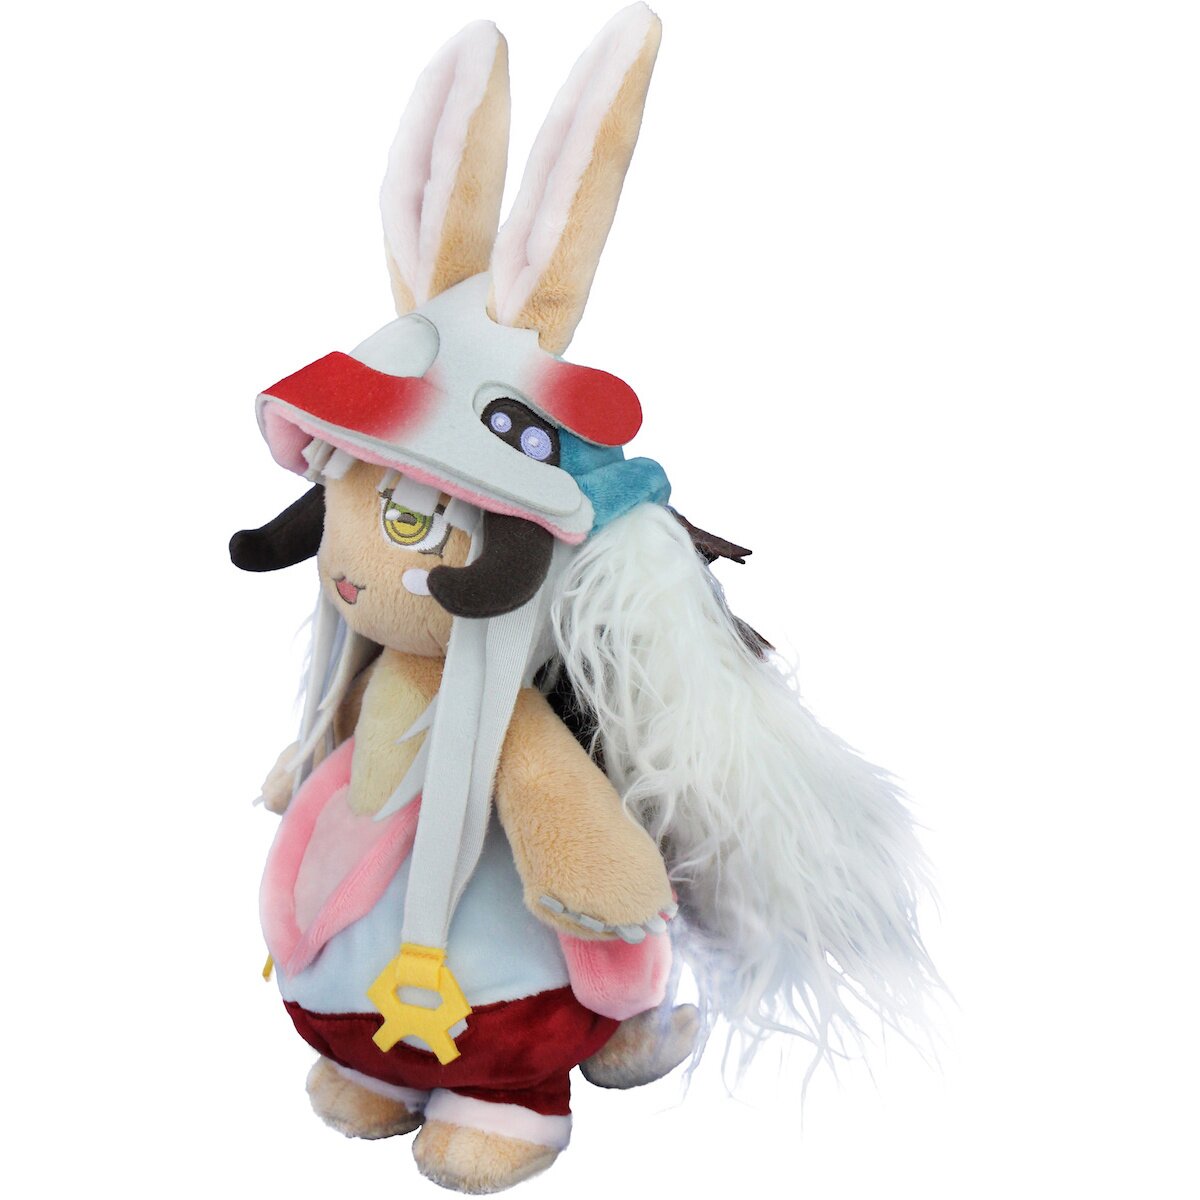 they are going to release Mochikororin plush of Made in Abyss